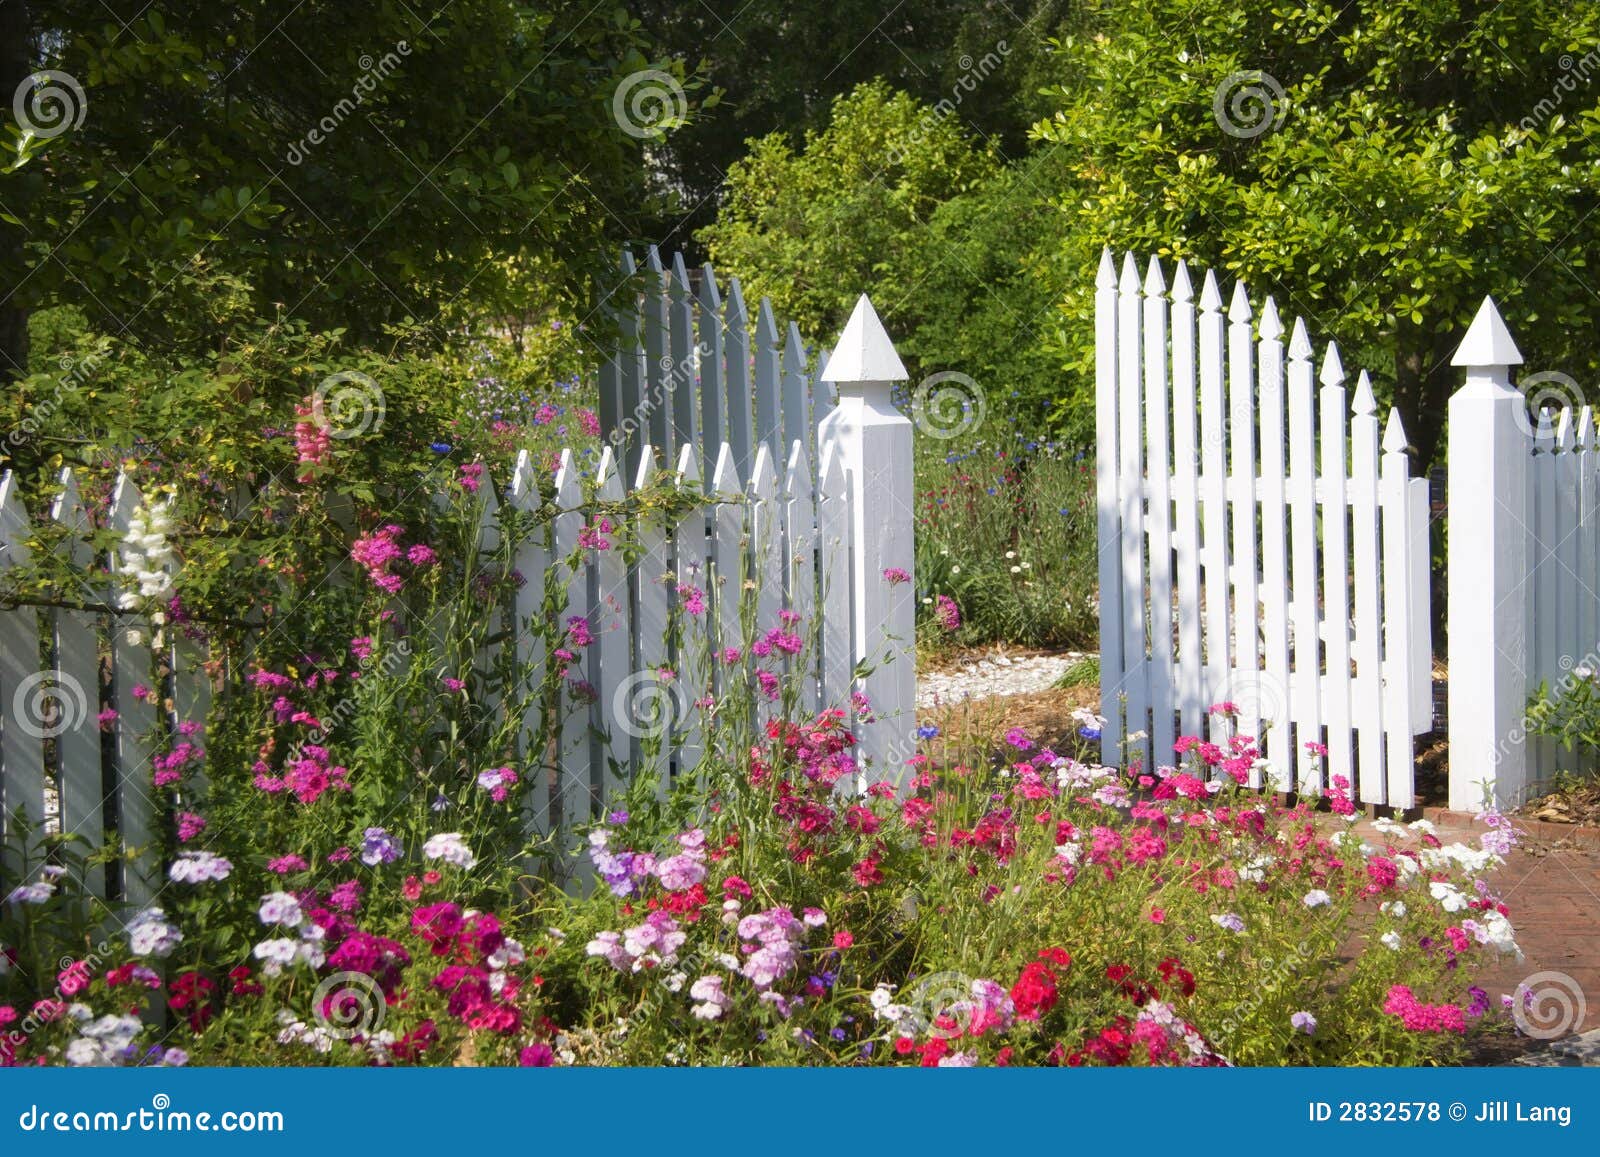 White Picket Fence and Garden Gate with Multi-Colored Flowers.